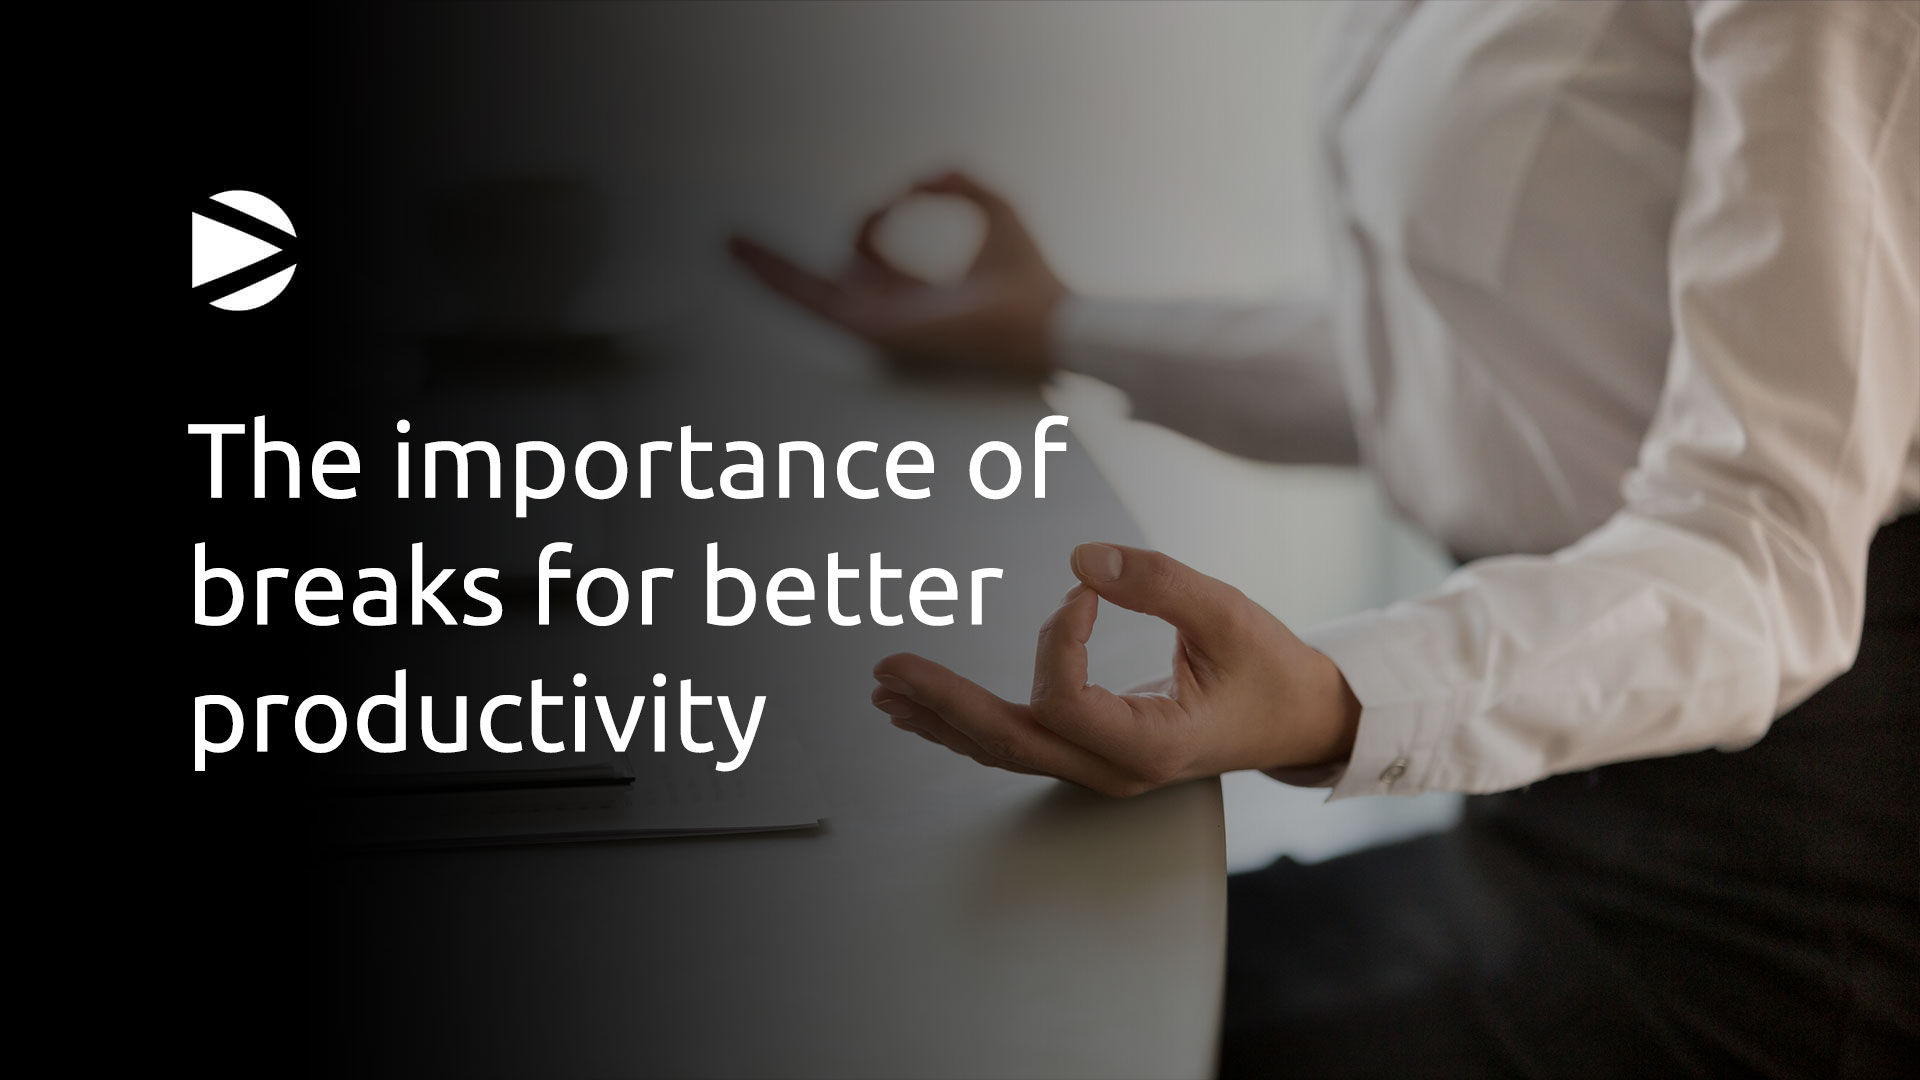 The importance of breaks for better productivity